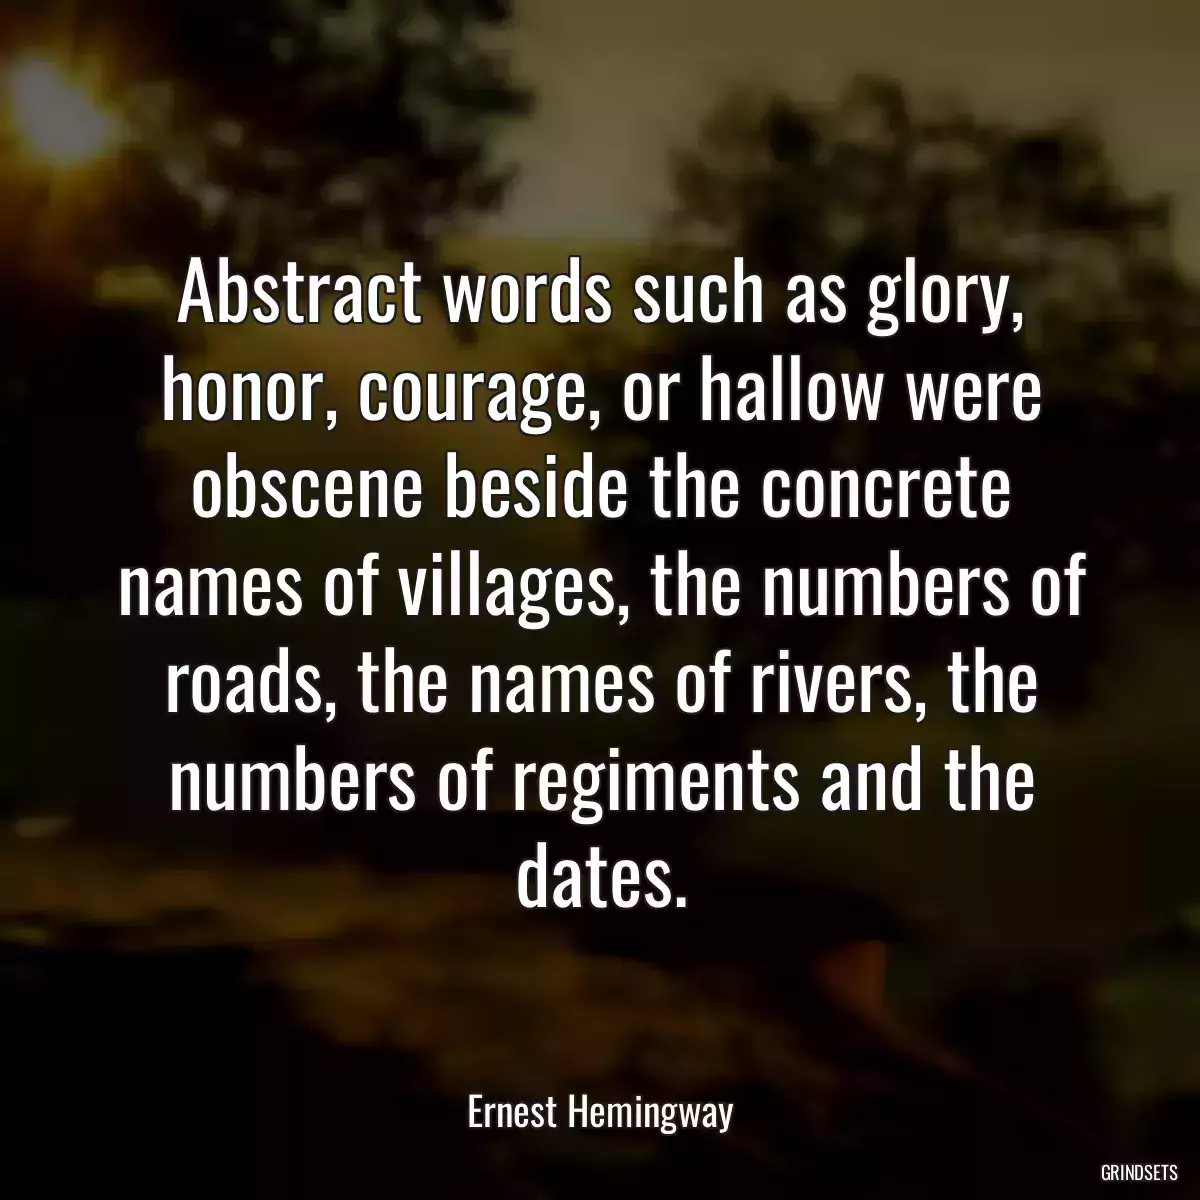 Abstract words such as glory, honor, courage, or hallow were obscene beside the concrete names of villages, the numbers of roads, the names of rivers, the numbers of regiments and the dates.